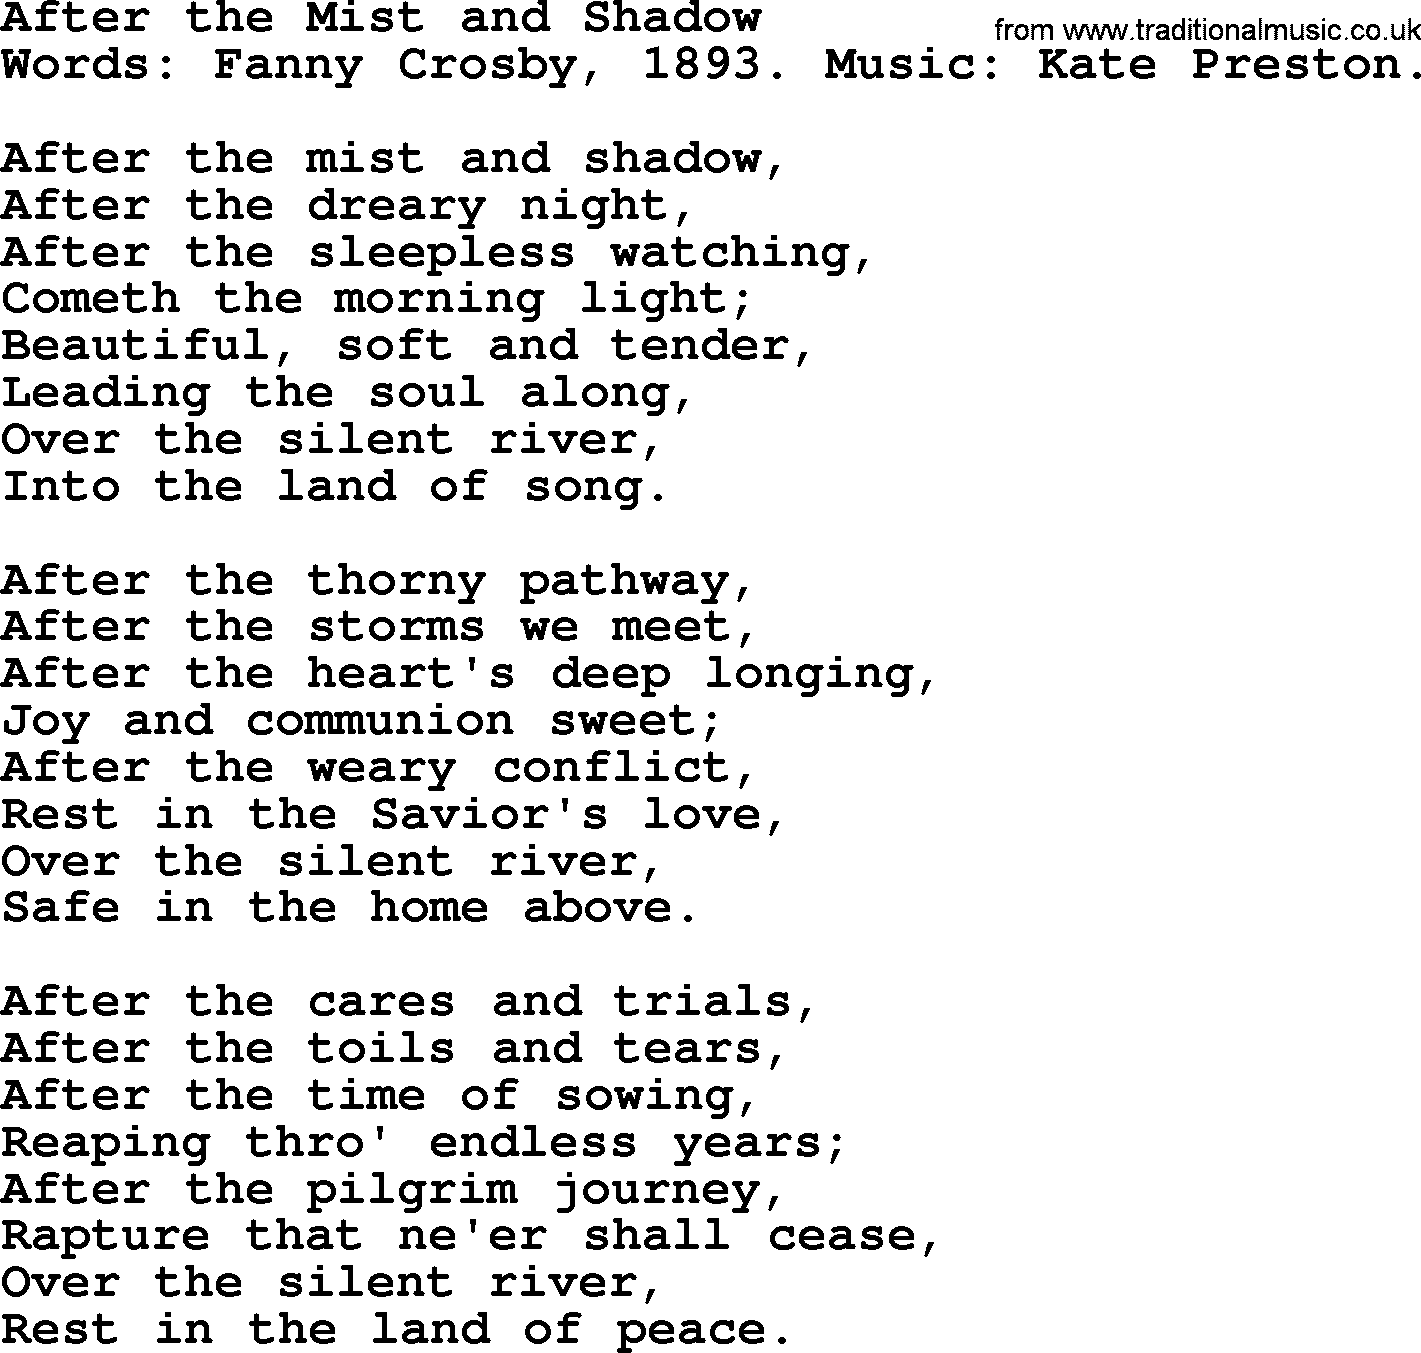 Fanny Crosby song: After The Mist And Shadow, lyrics